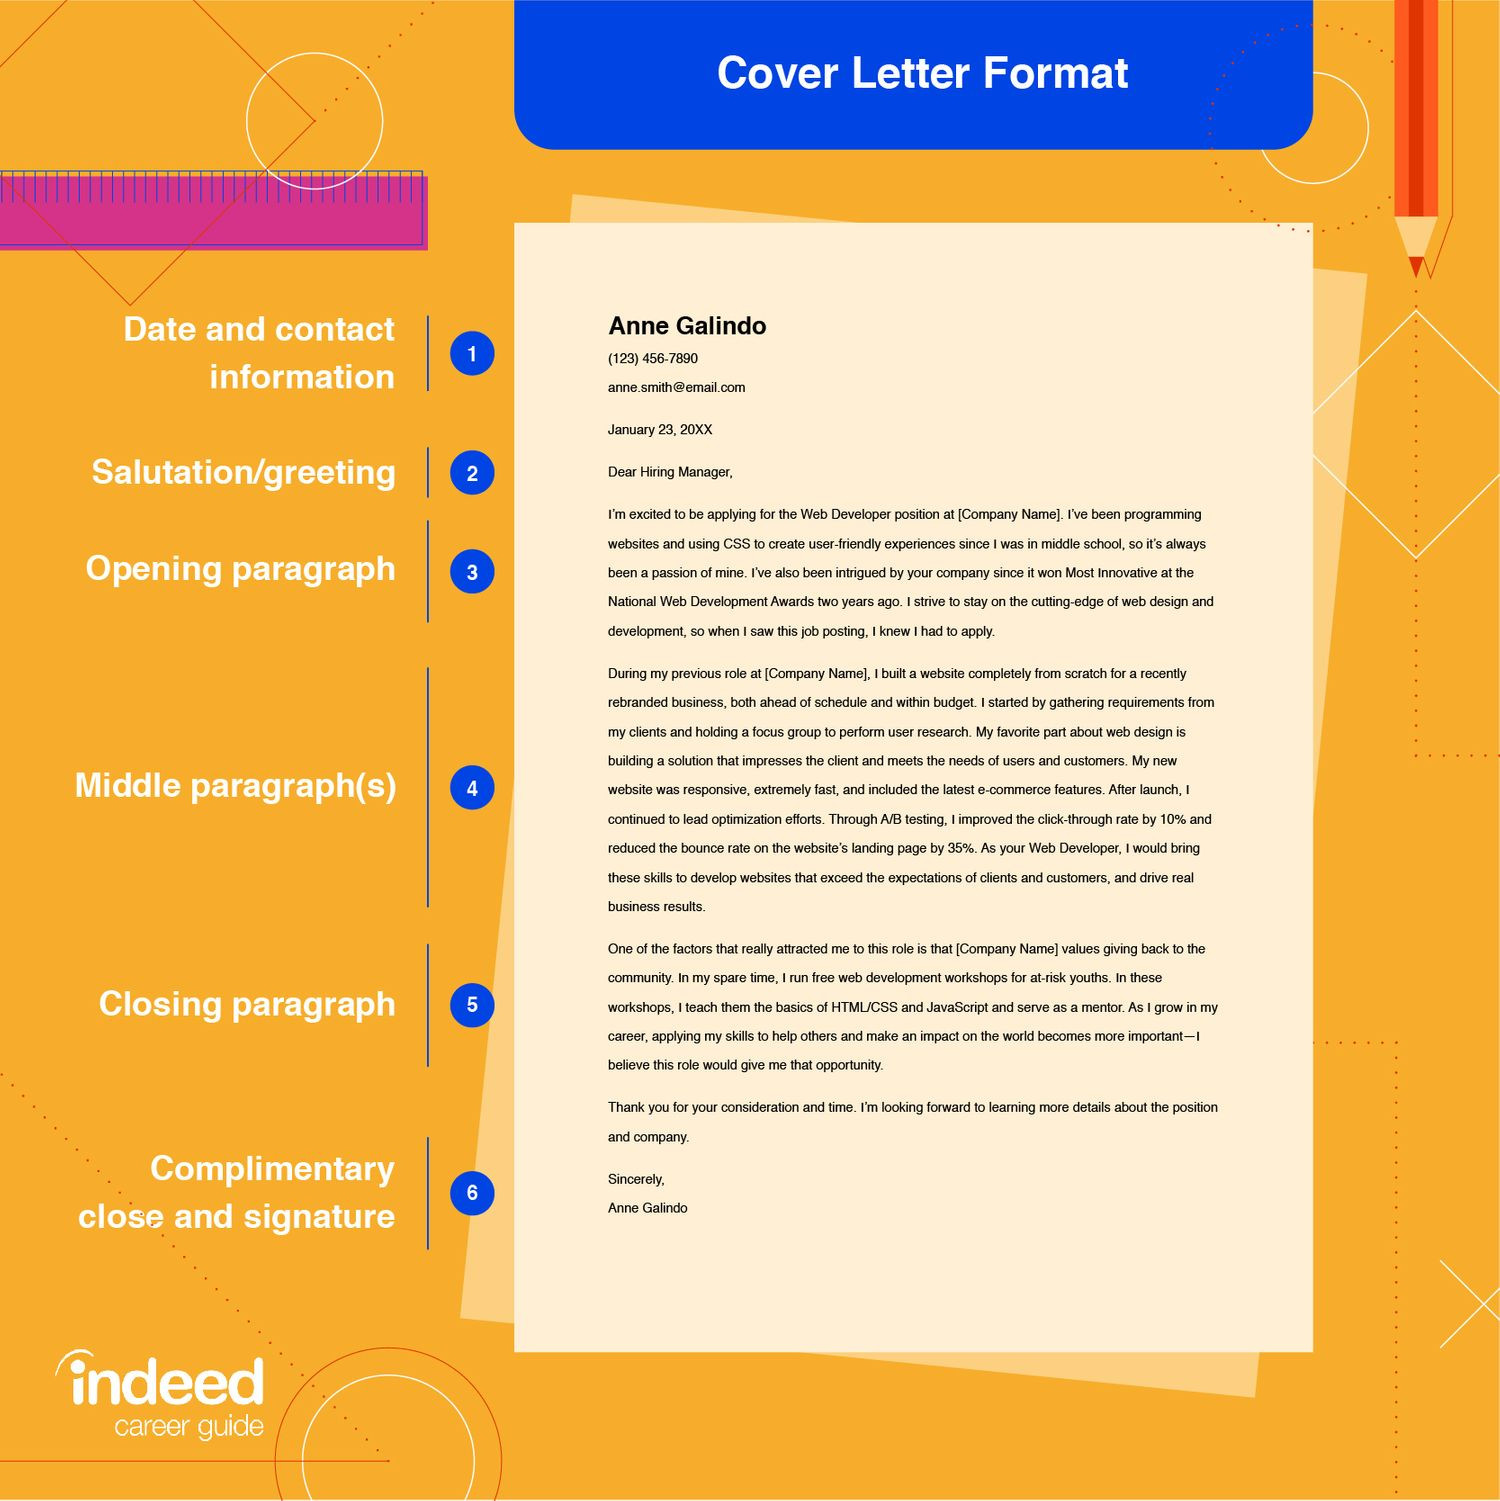 Sample Email to Send Cover Letter and Resume How to Send An Email Cover Letter (with Example) Indeed.com